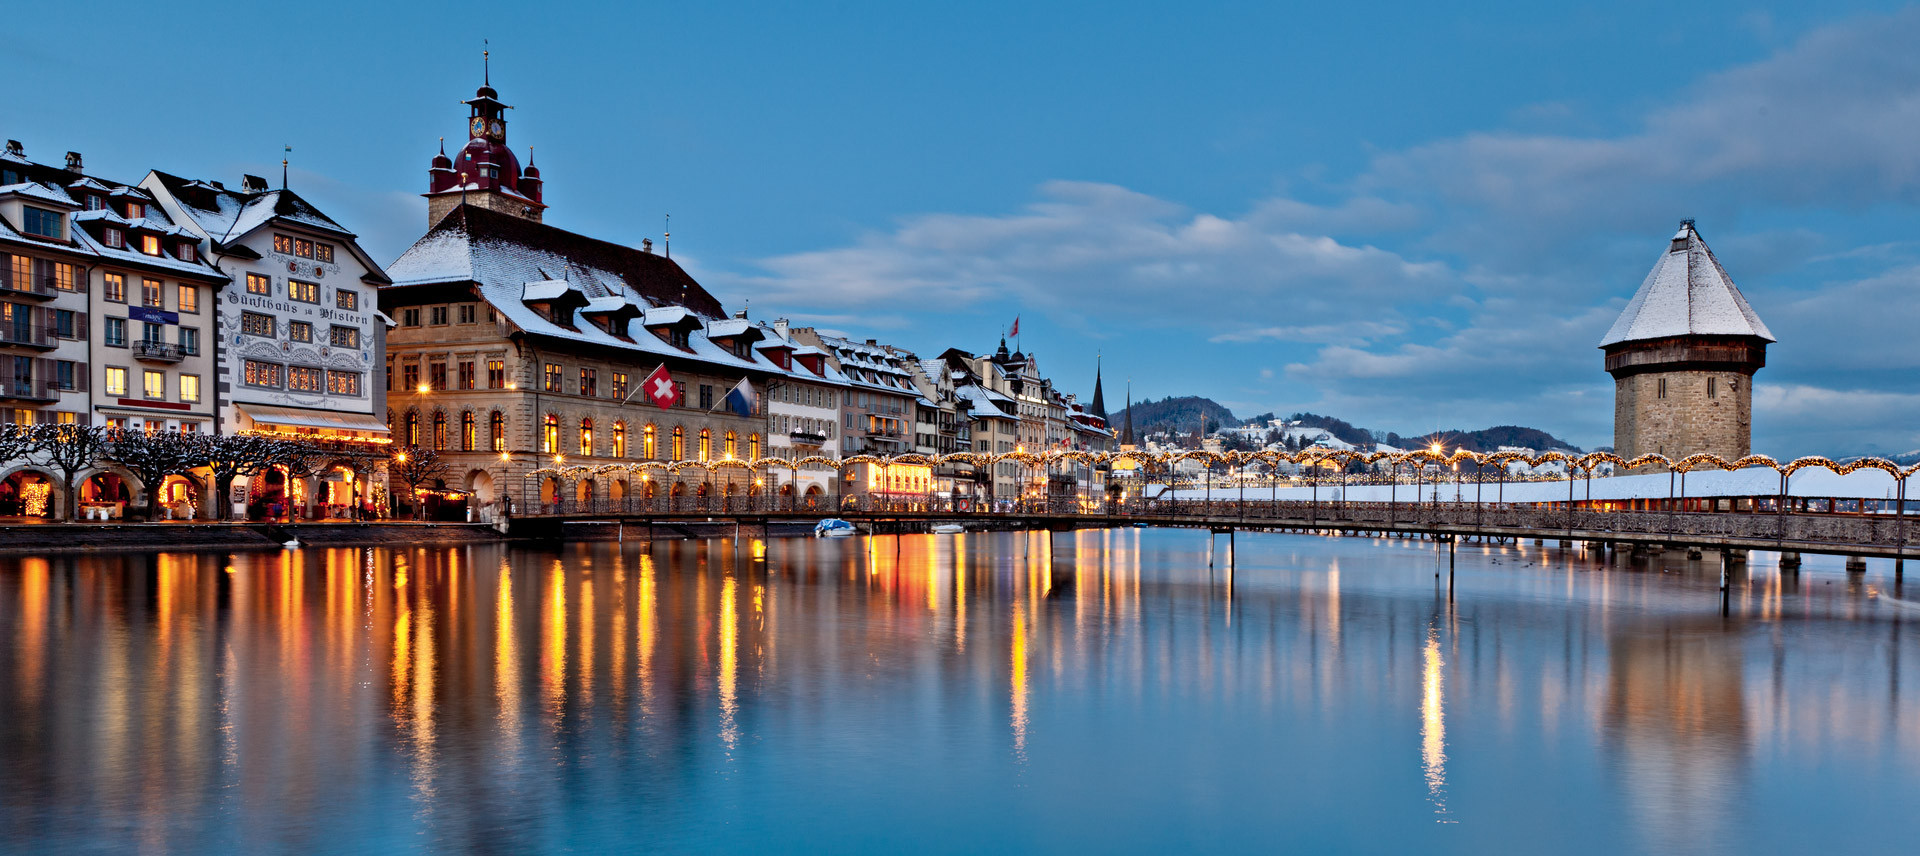 Lucerne 2021 benefit from additional financial support for Winter Universiade